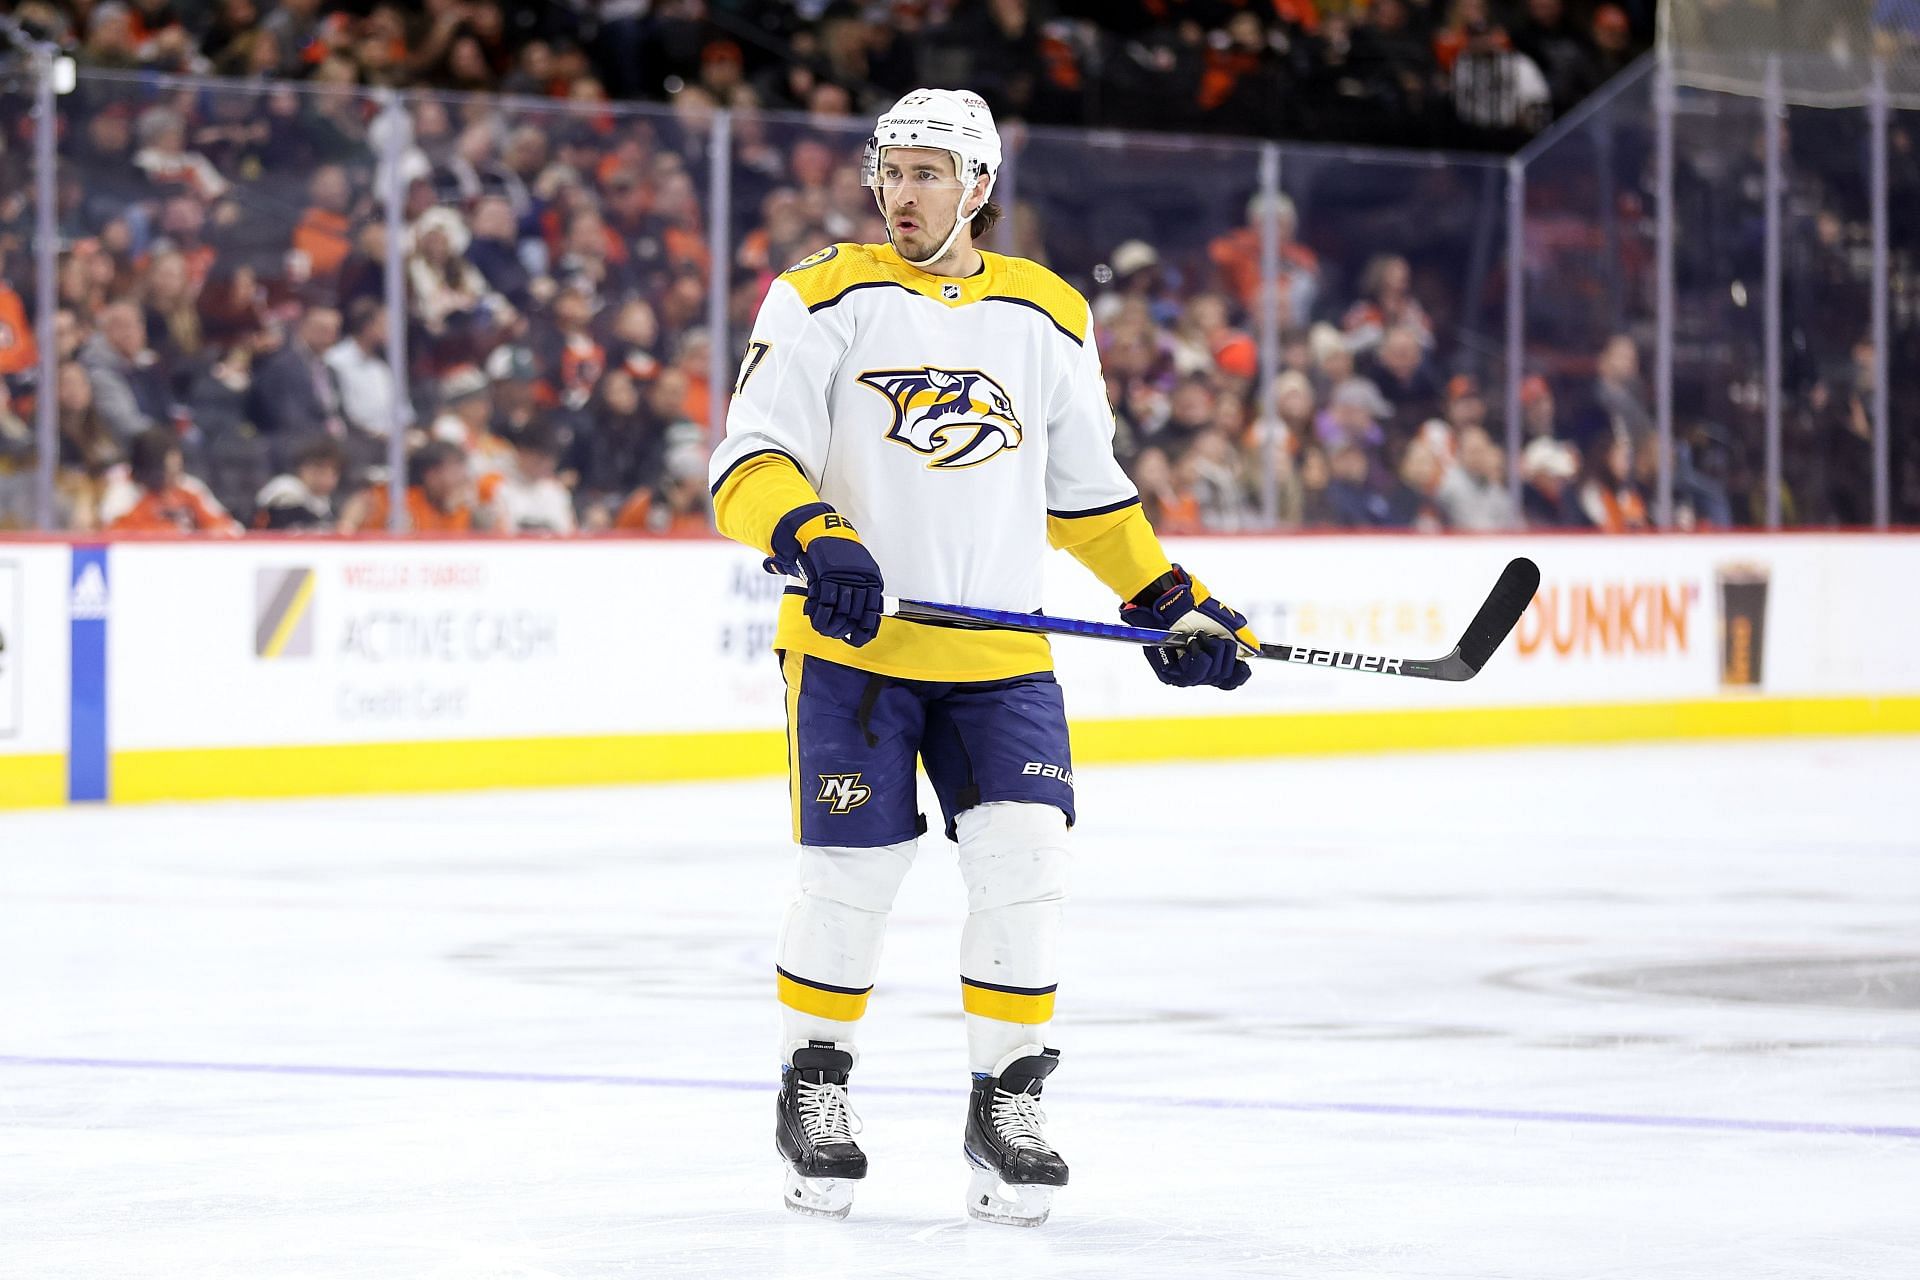 Ryan McDonagh played for both the Rangers and the Predators